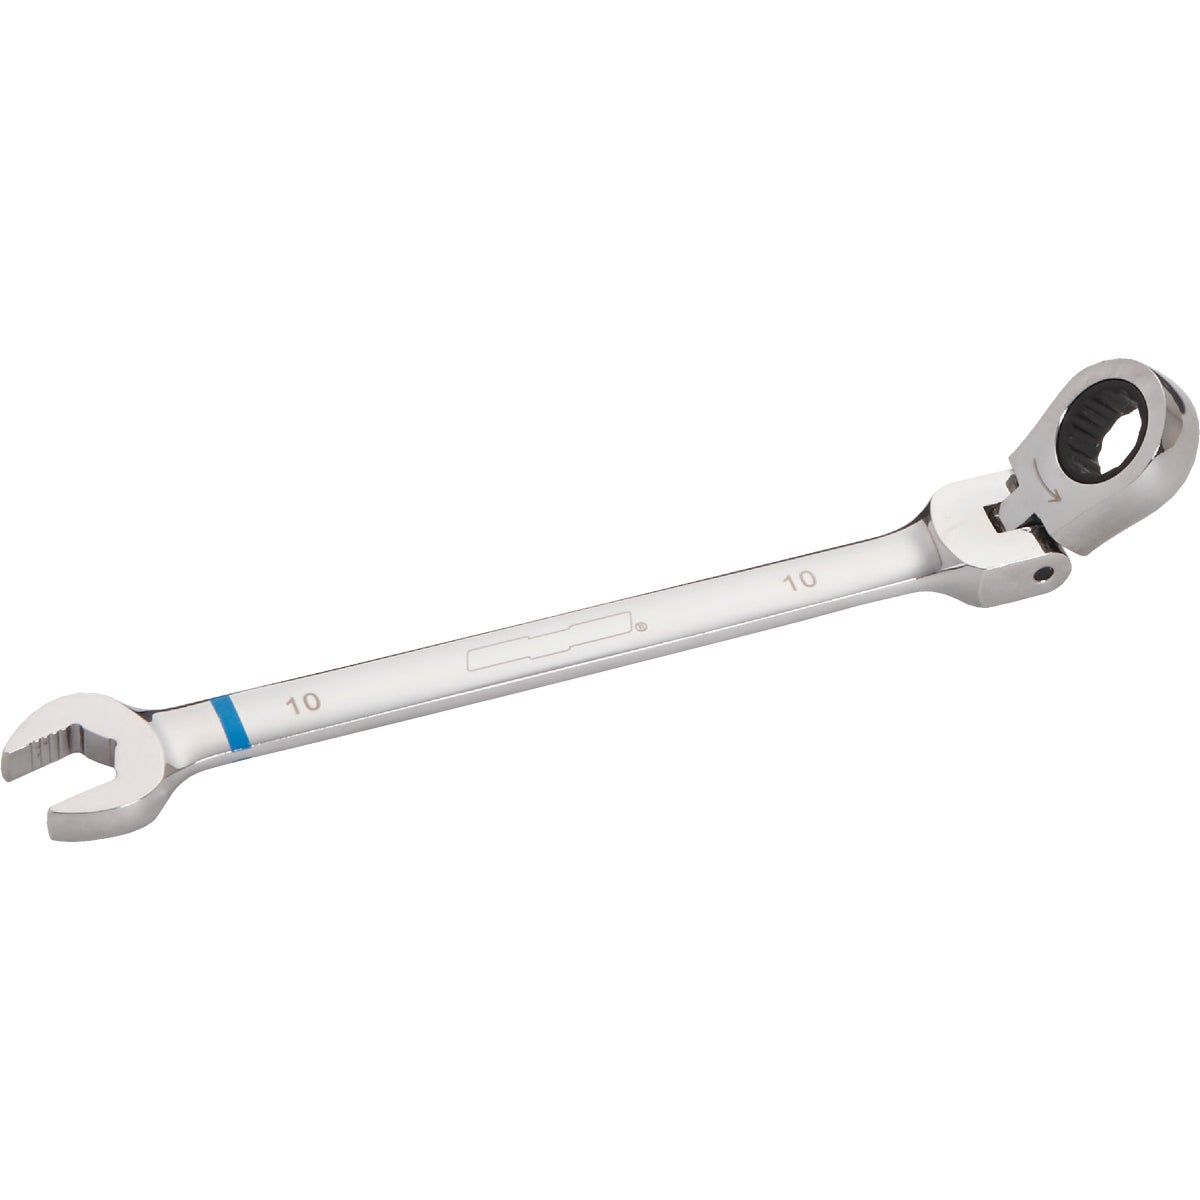 Channellock Metric 10 mm 12-Point Ratcheting Flex-Head Wrench